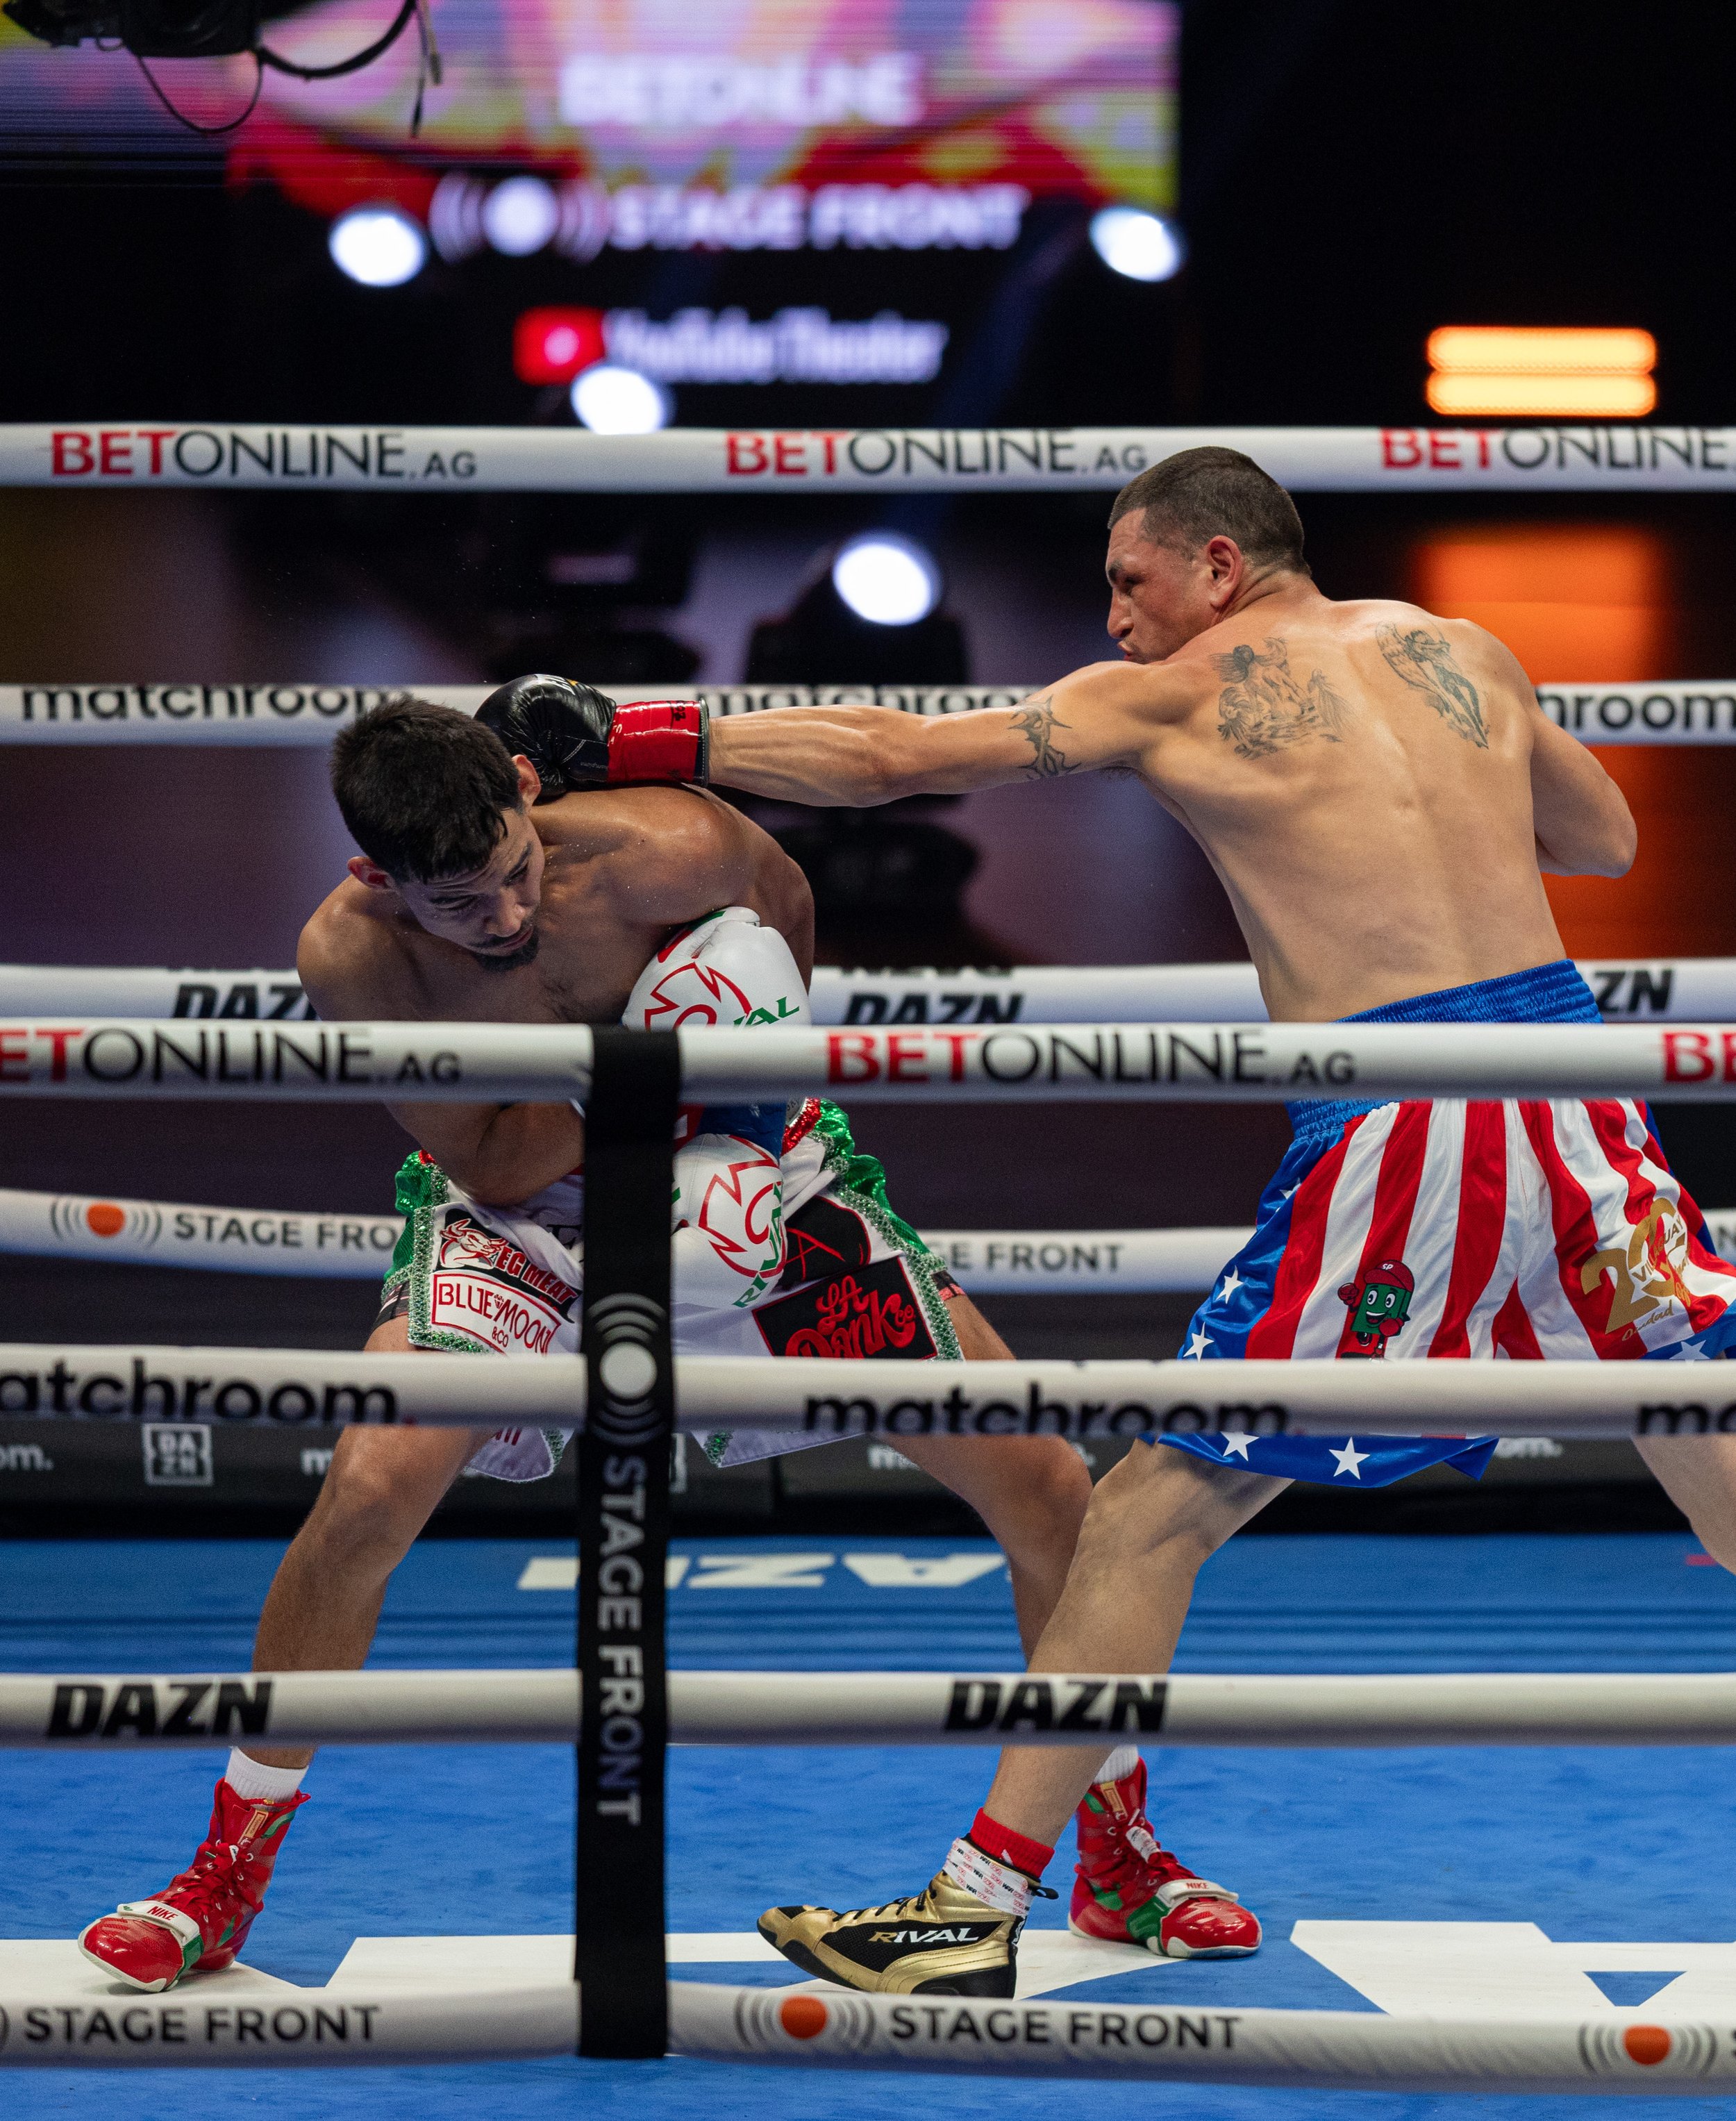  Diego Pacheco(L) successfully dodging Marcelo Coceres’s jab during their fight for the WBO International and USWBC Super-Bantamweight title on Saturday, Nov. 18 in YouTube Theater at Inglewood, Calif. (Danilo Perez | The Corsair) 